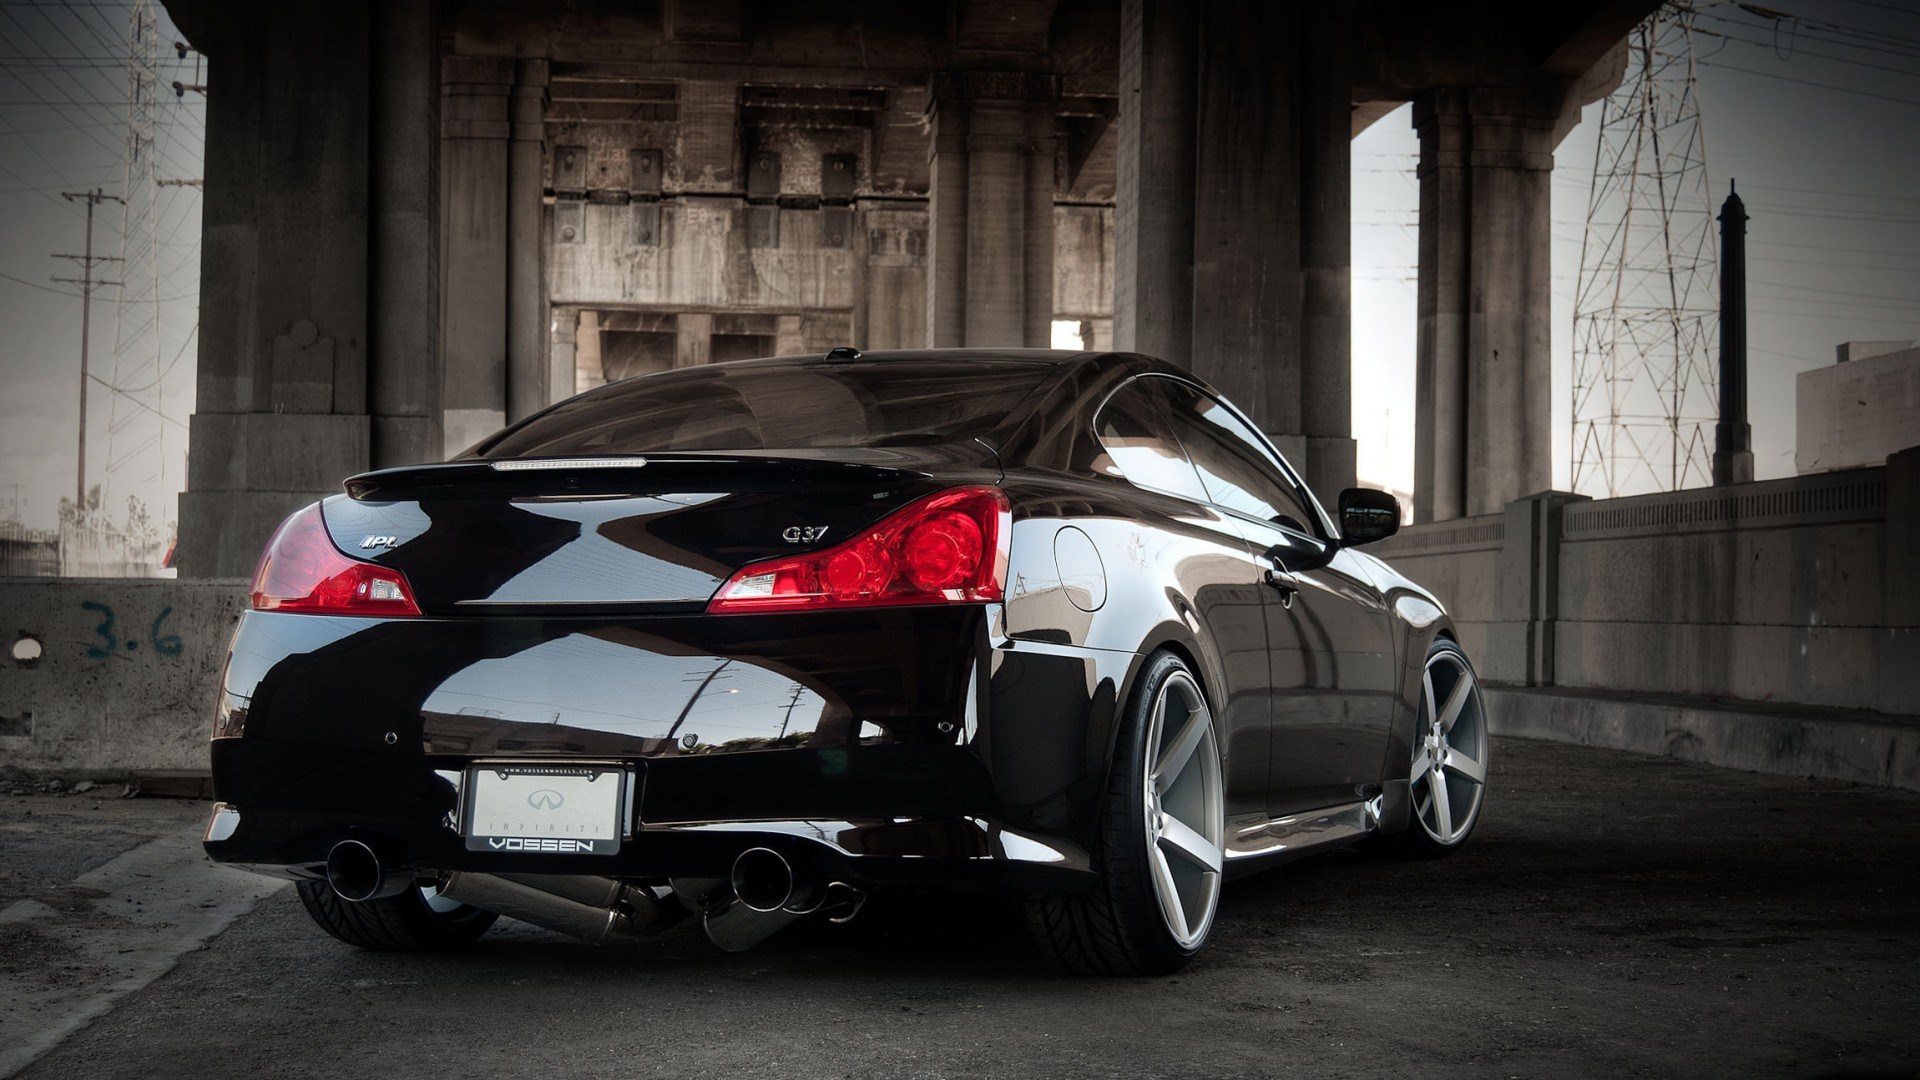 infiniti g37 tail lights paint reflections wide hd wallpaper is a lovely background.